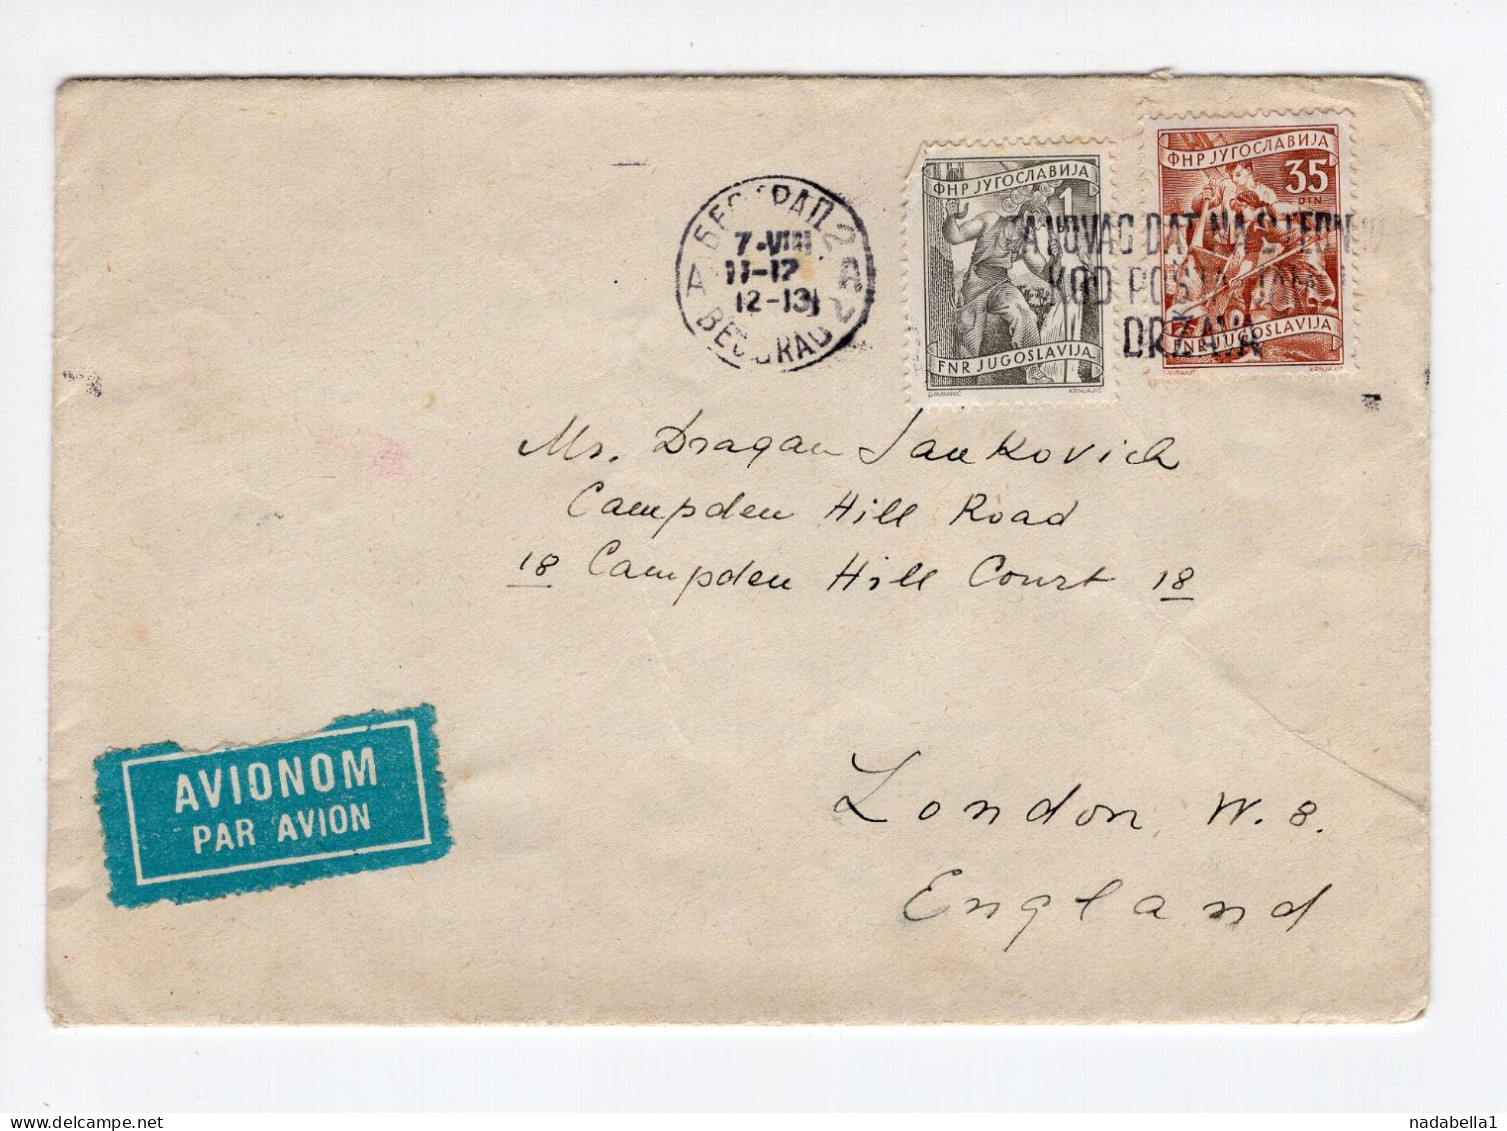 1957. YUGOSLAVIA,SERBIA,BELGRADE,AIRMAIL COVER TO LONDON,GREAT BRITAIN,LETTER INSIDE - Aéreo